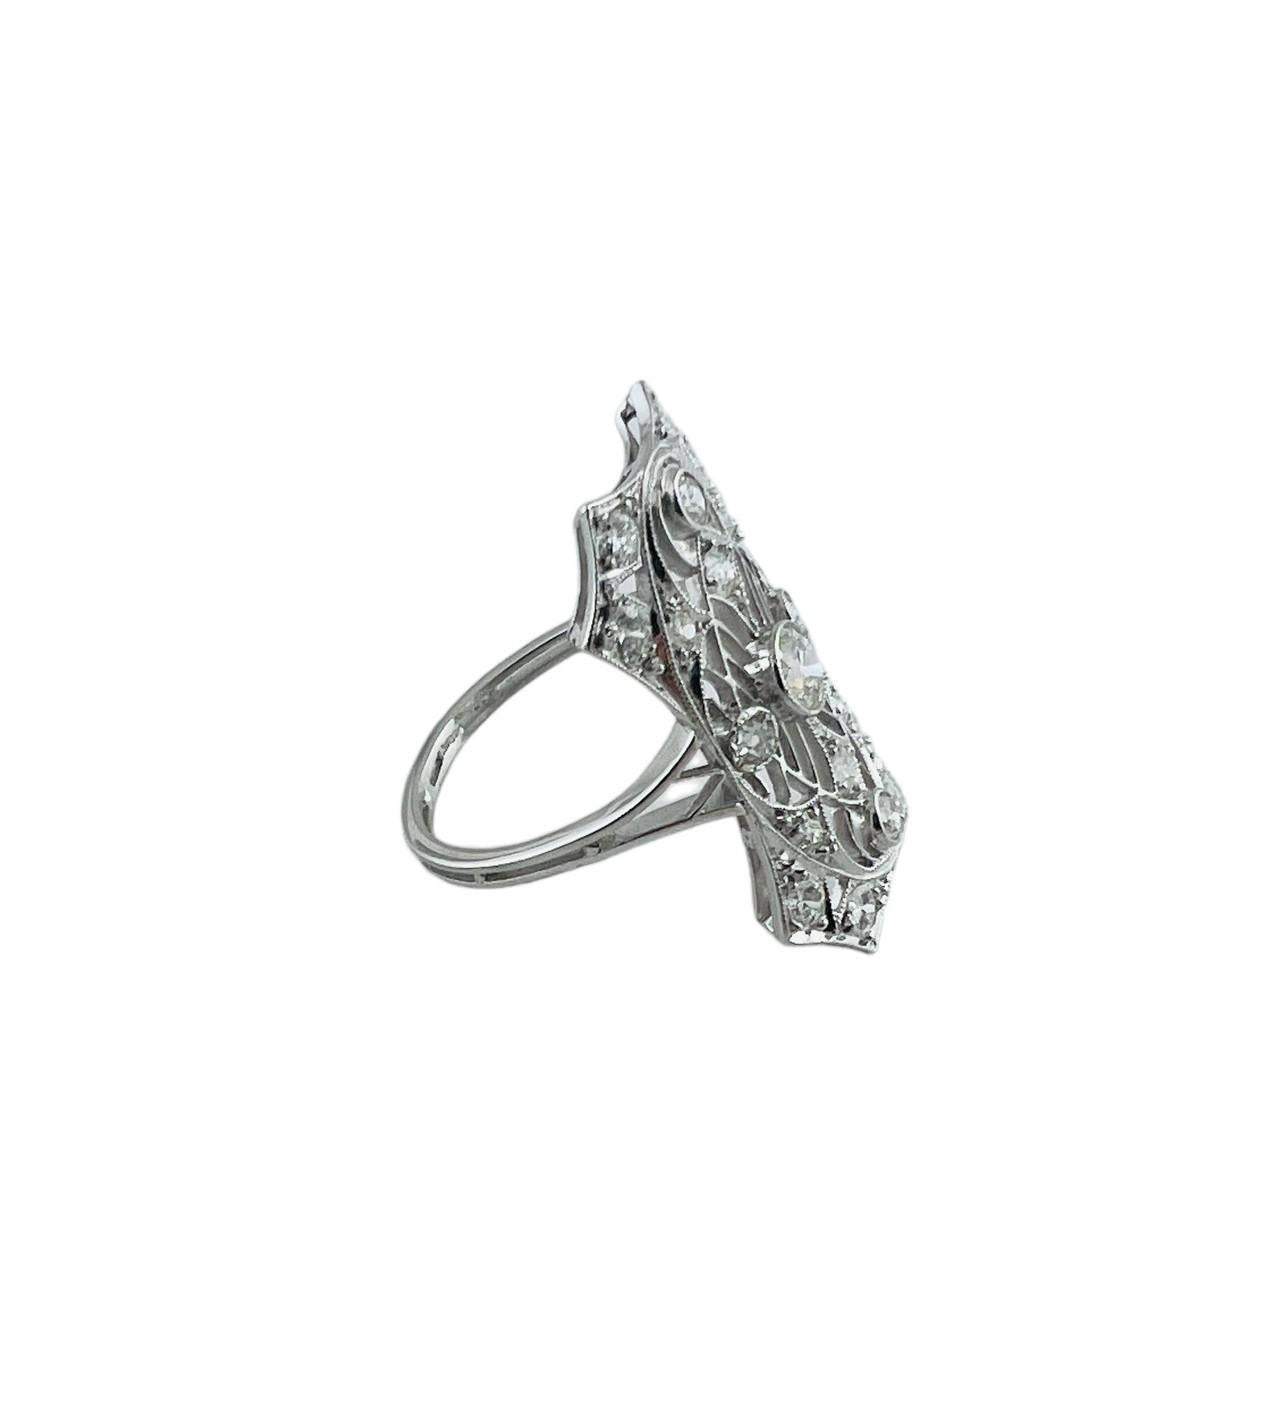 Vintage Platinum and Diamond Long Filigree Ring Size 6.5 #16761 For Sale 2